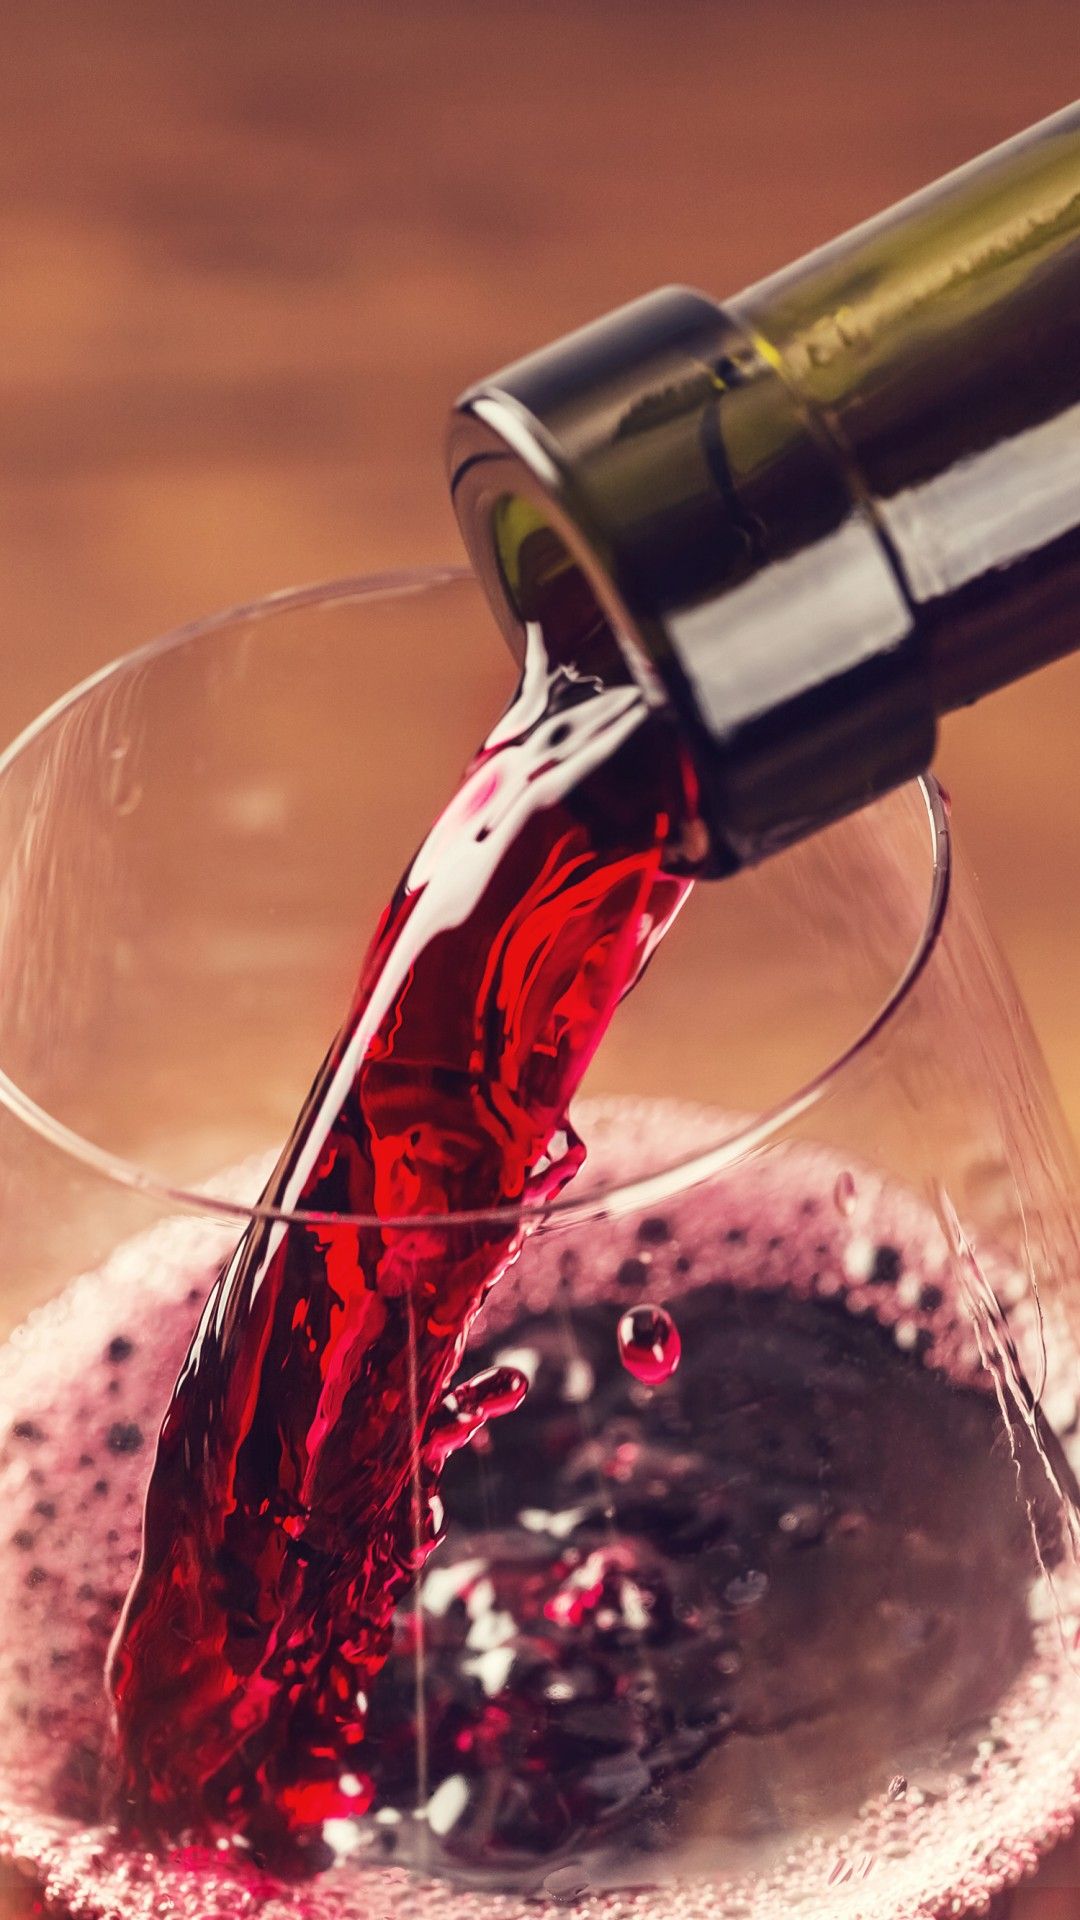 Wallpaper Red wine, Glass, Bottle, 4K, Lifestyle / Editor's Picks,. Wallpaper for iPhone, Android, Mobile and Desktop